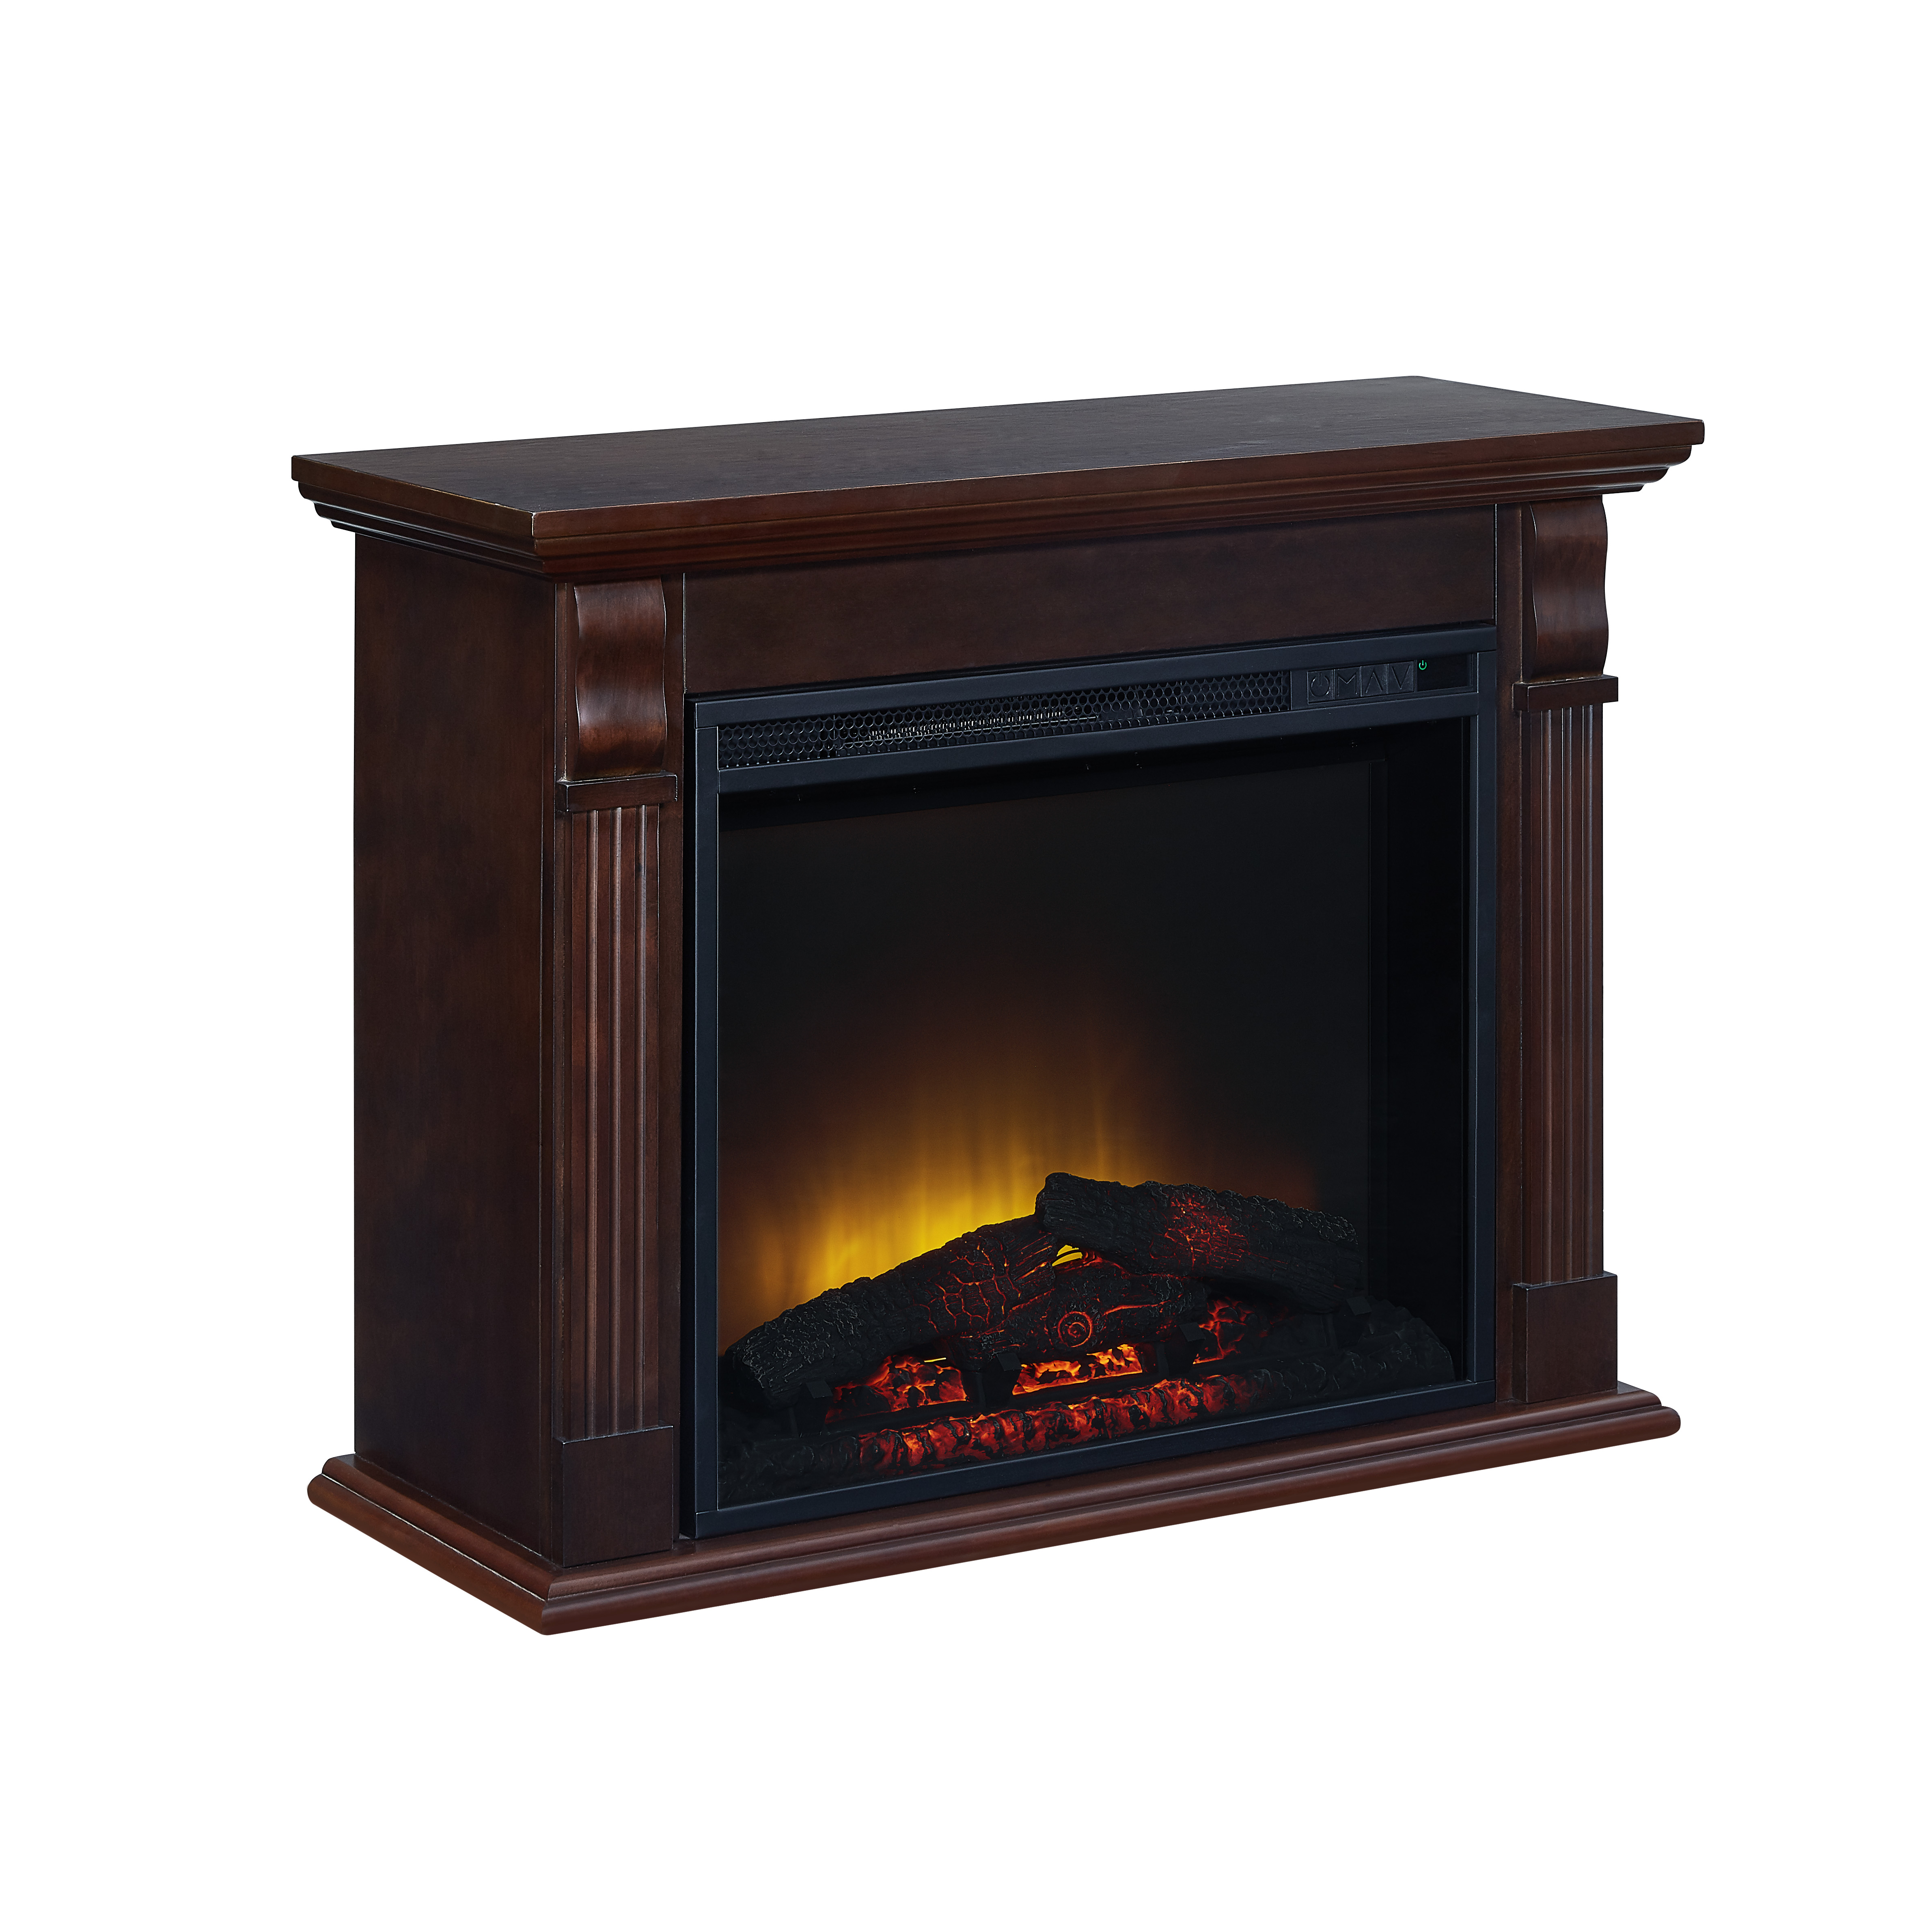 Big Lots Fireplaces Clearance Unique Bold Flame 33 46 Inch Electric Fireplace In Chestnut